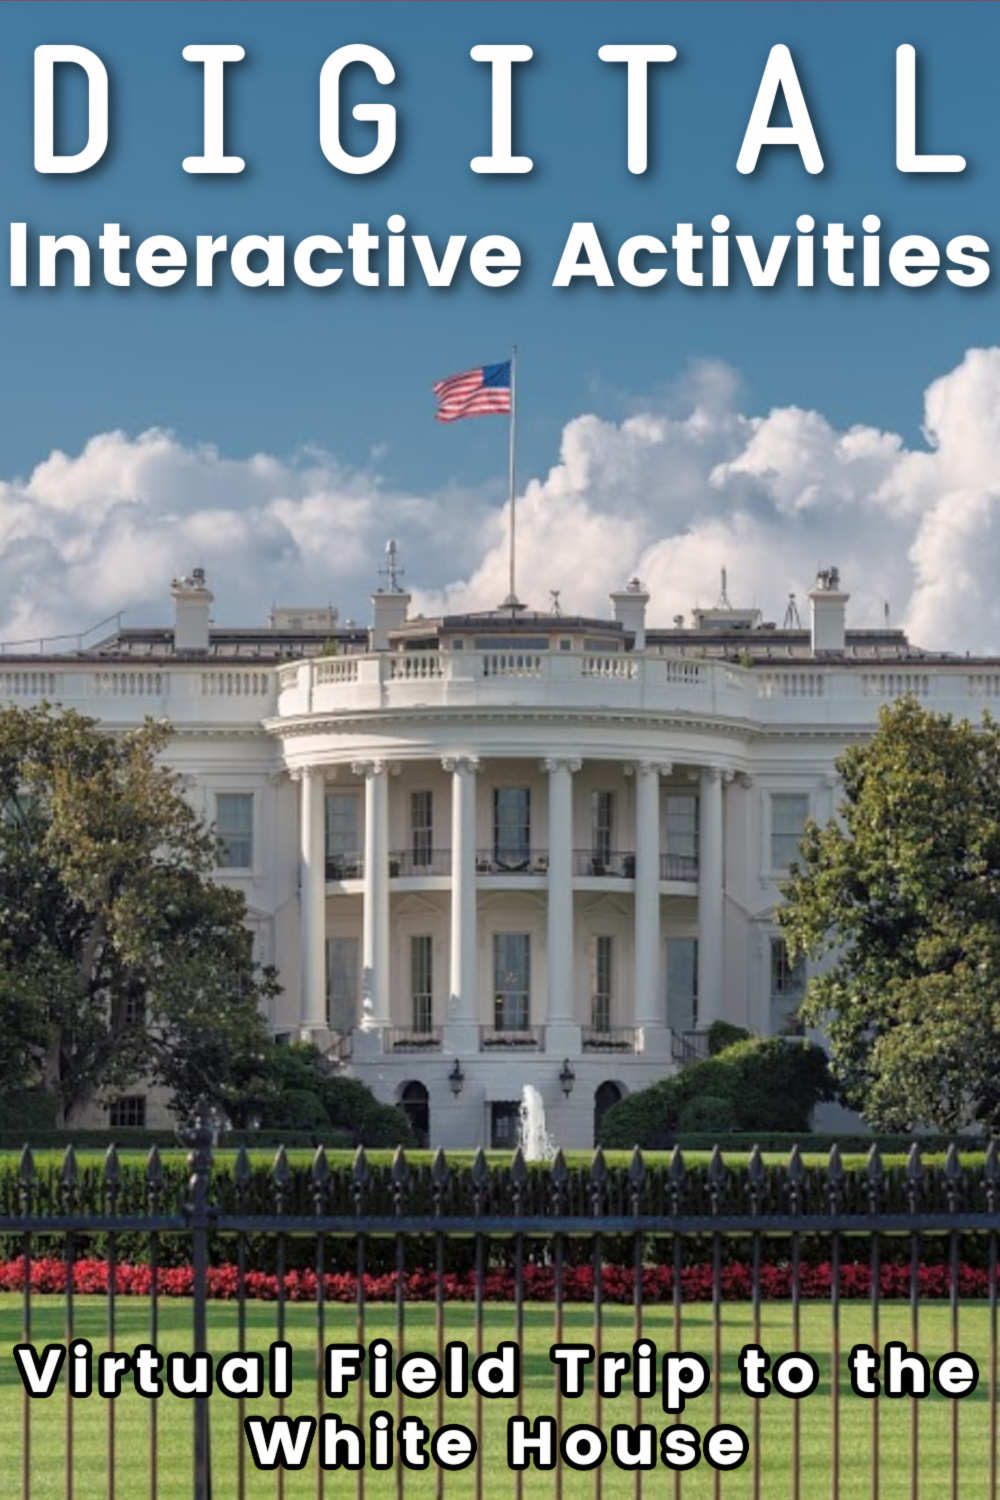 Facts about the white house for kids